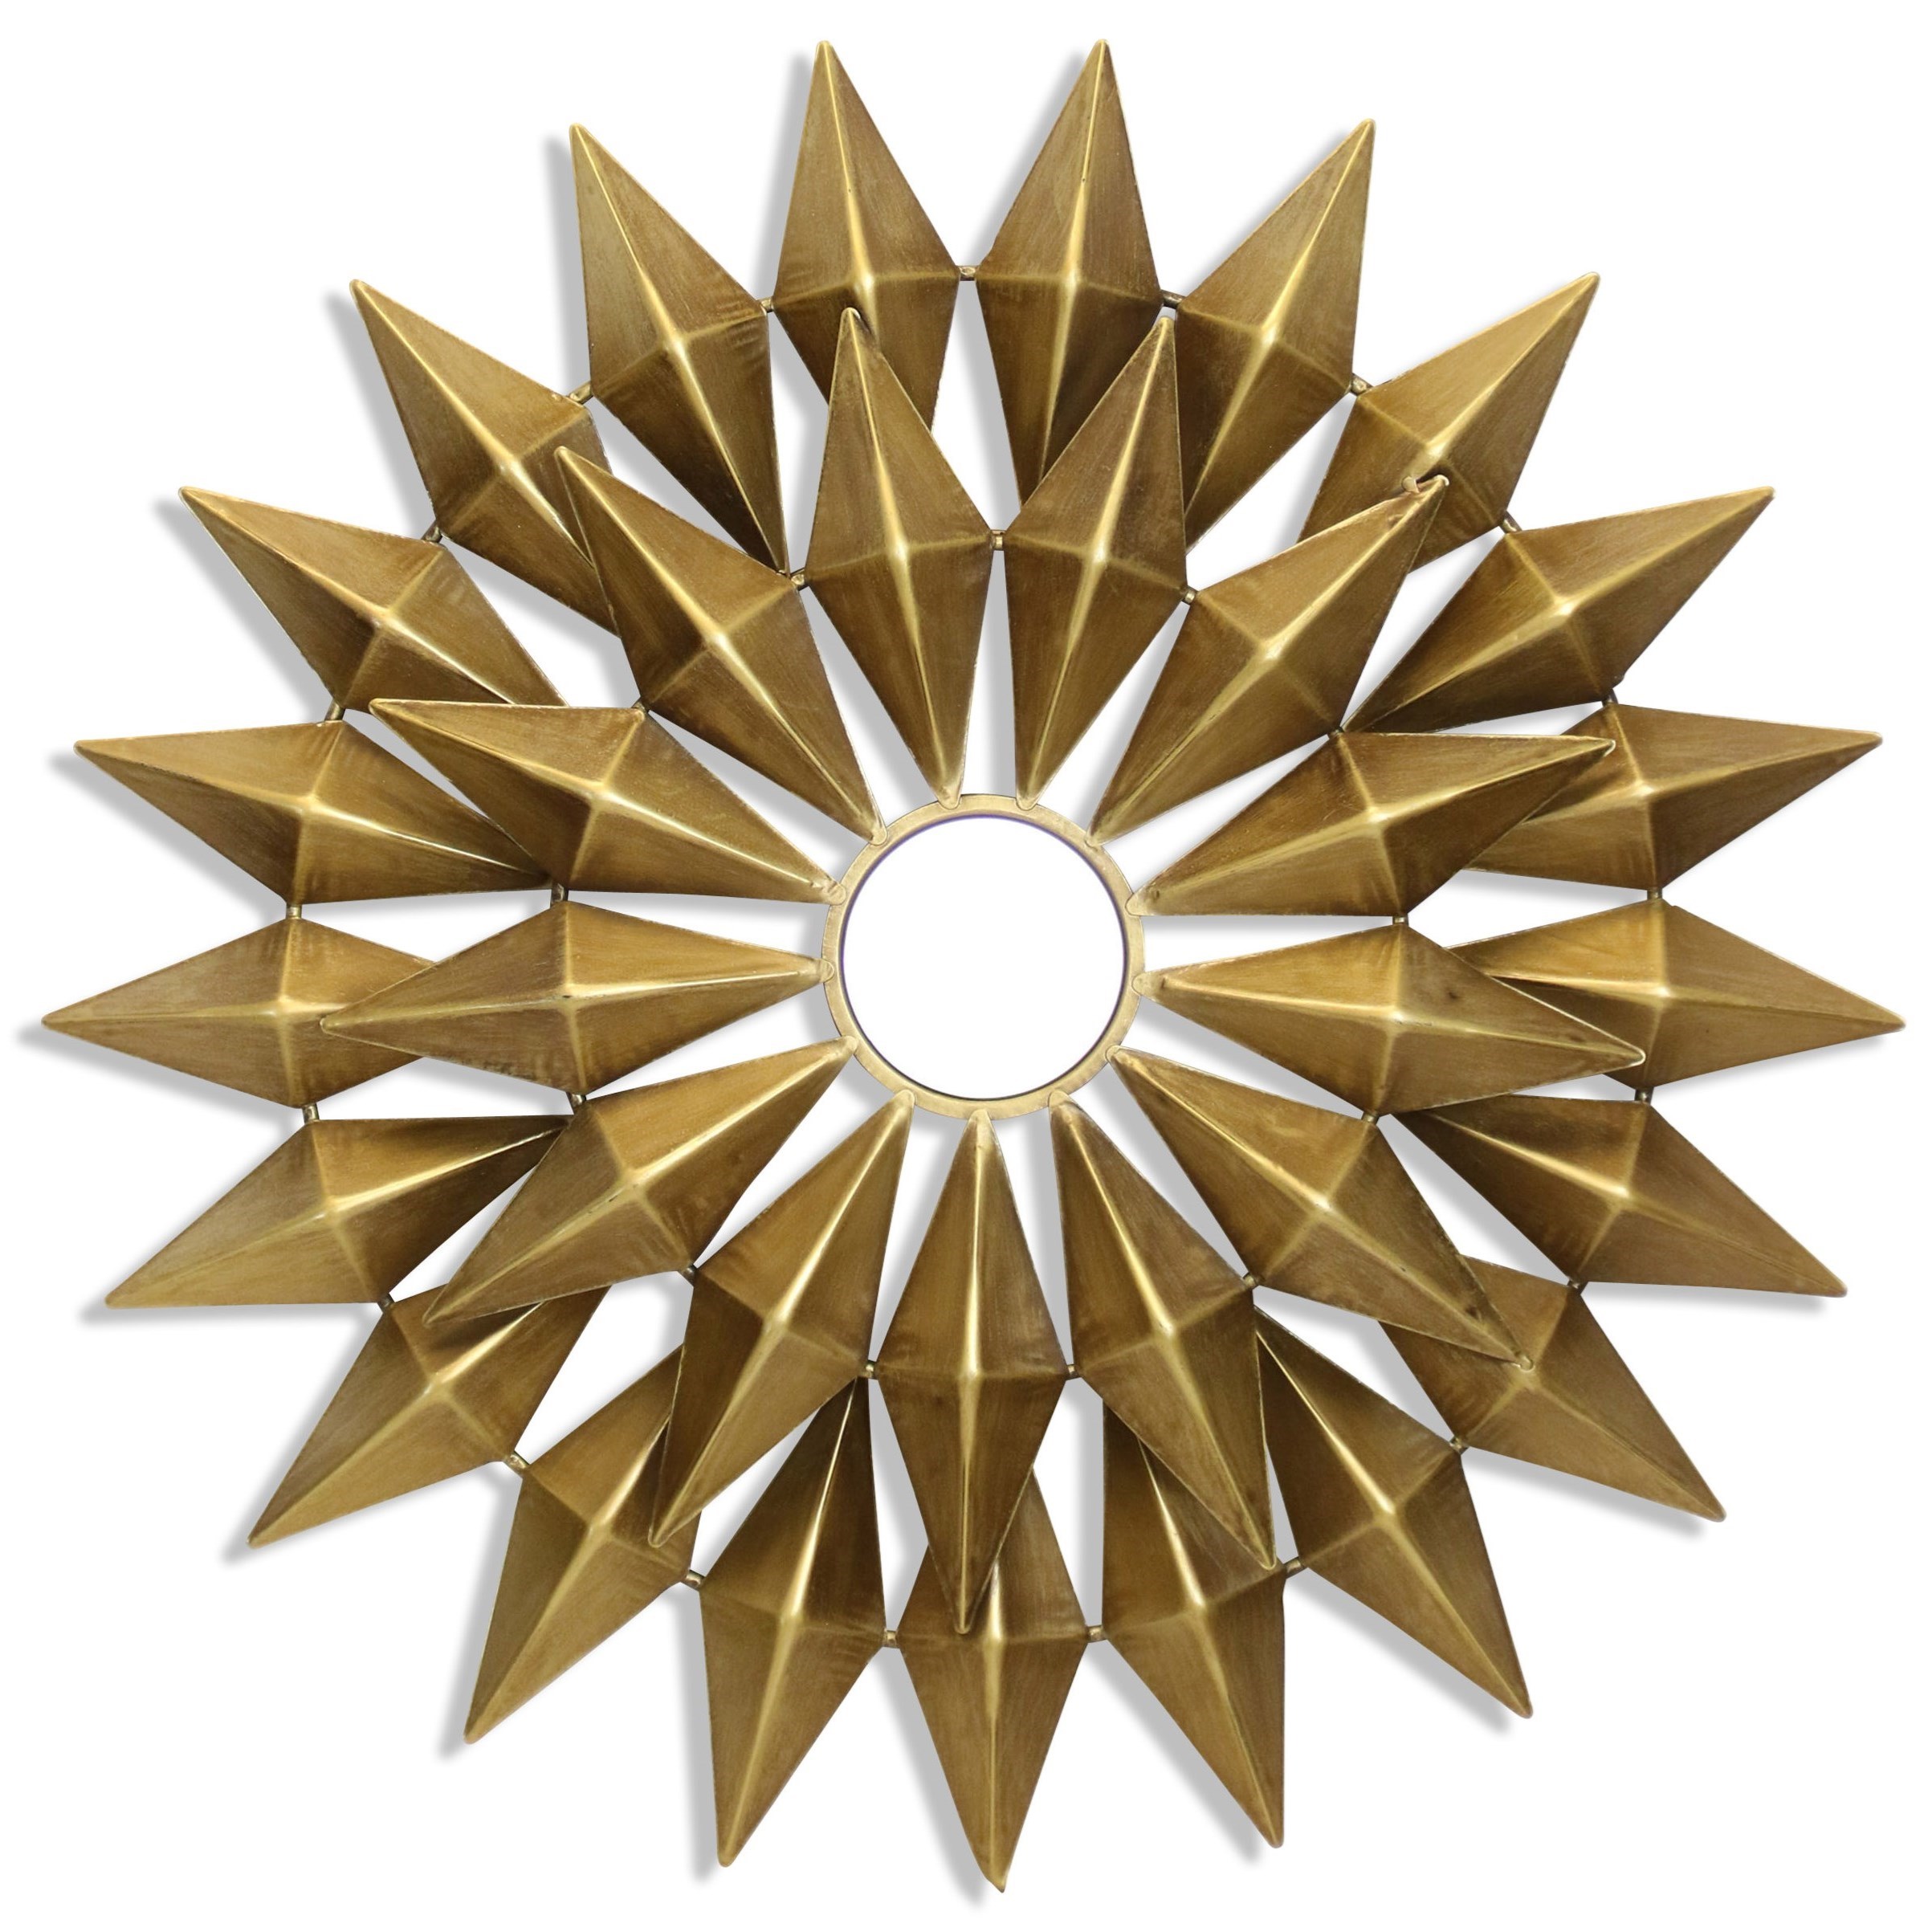 Gold Metal Starburst Wall Art with Mirrored Center